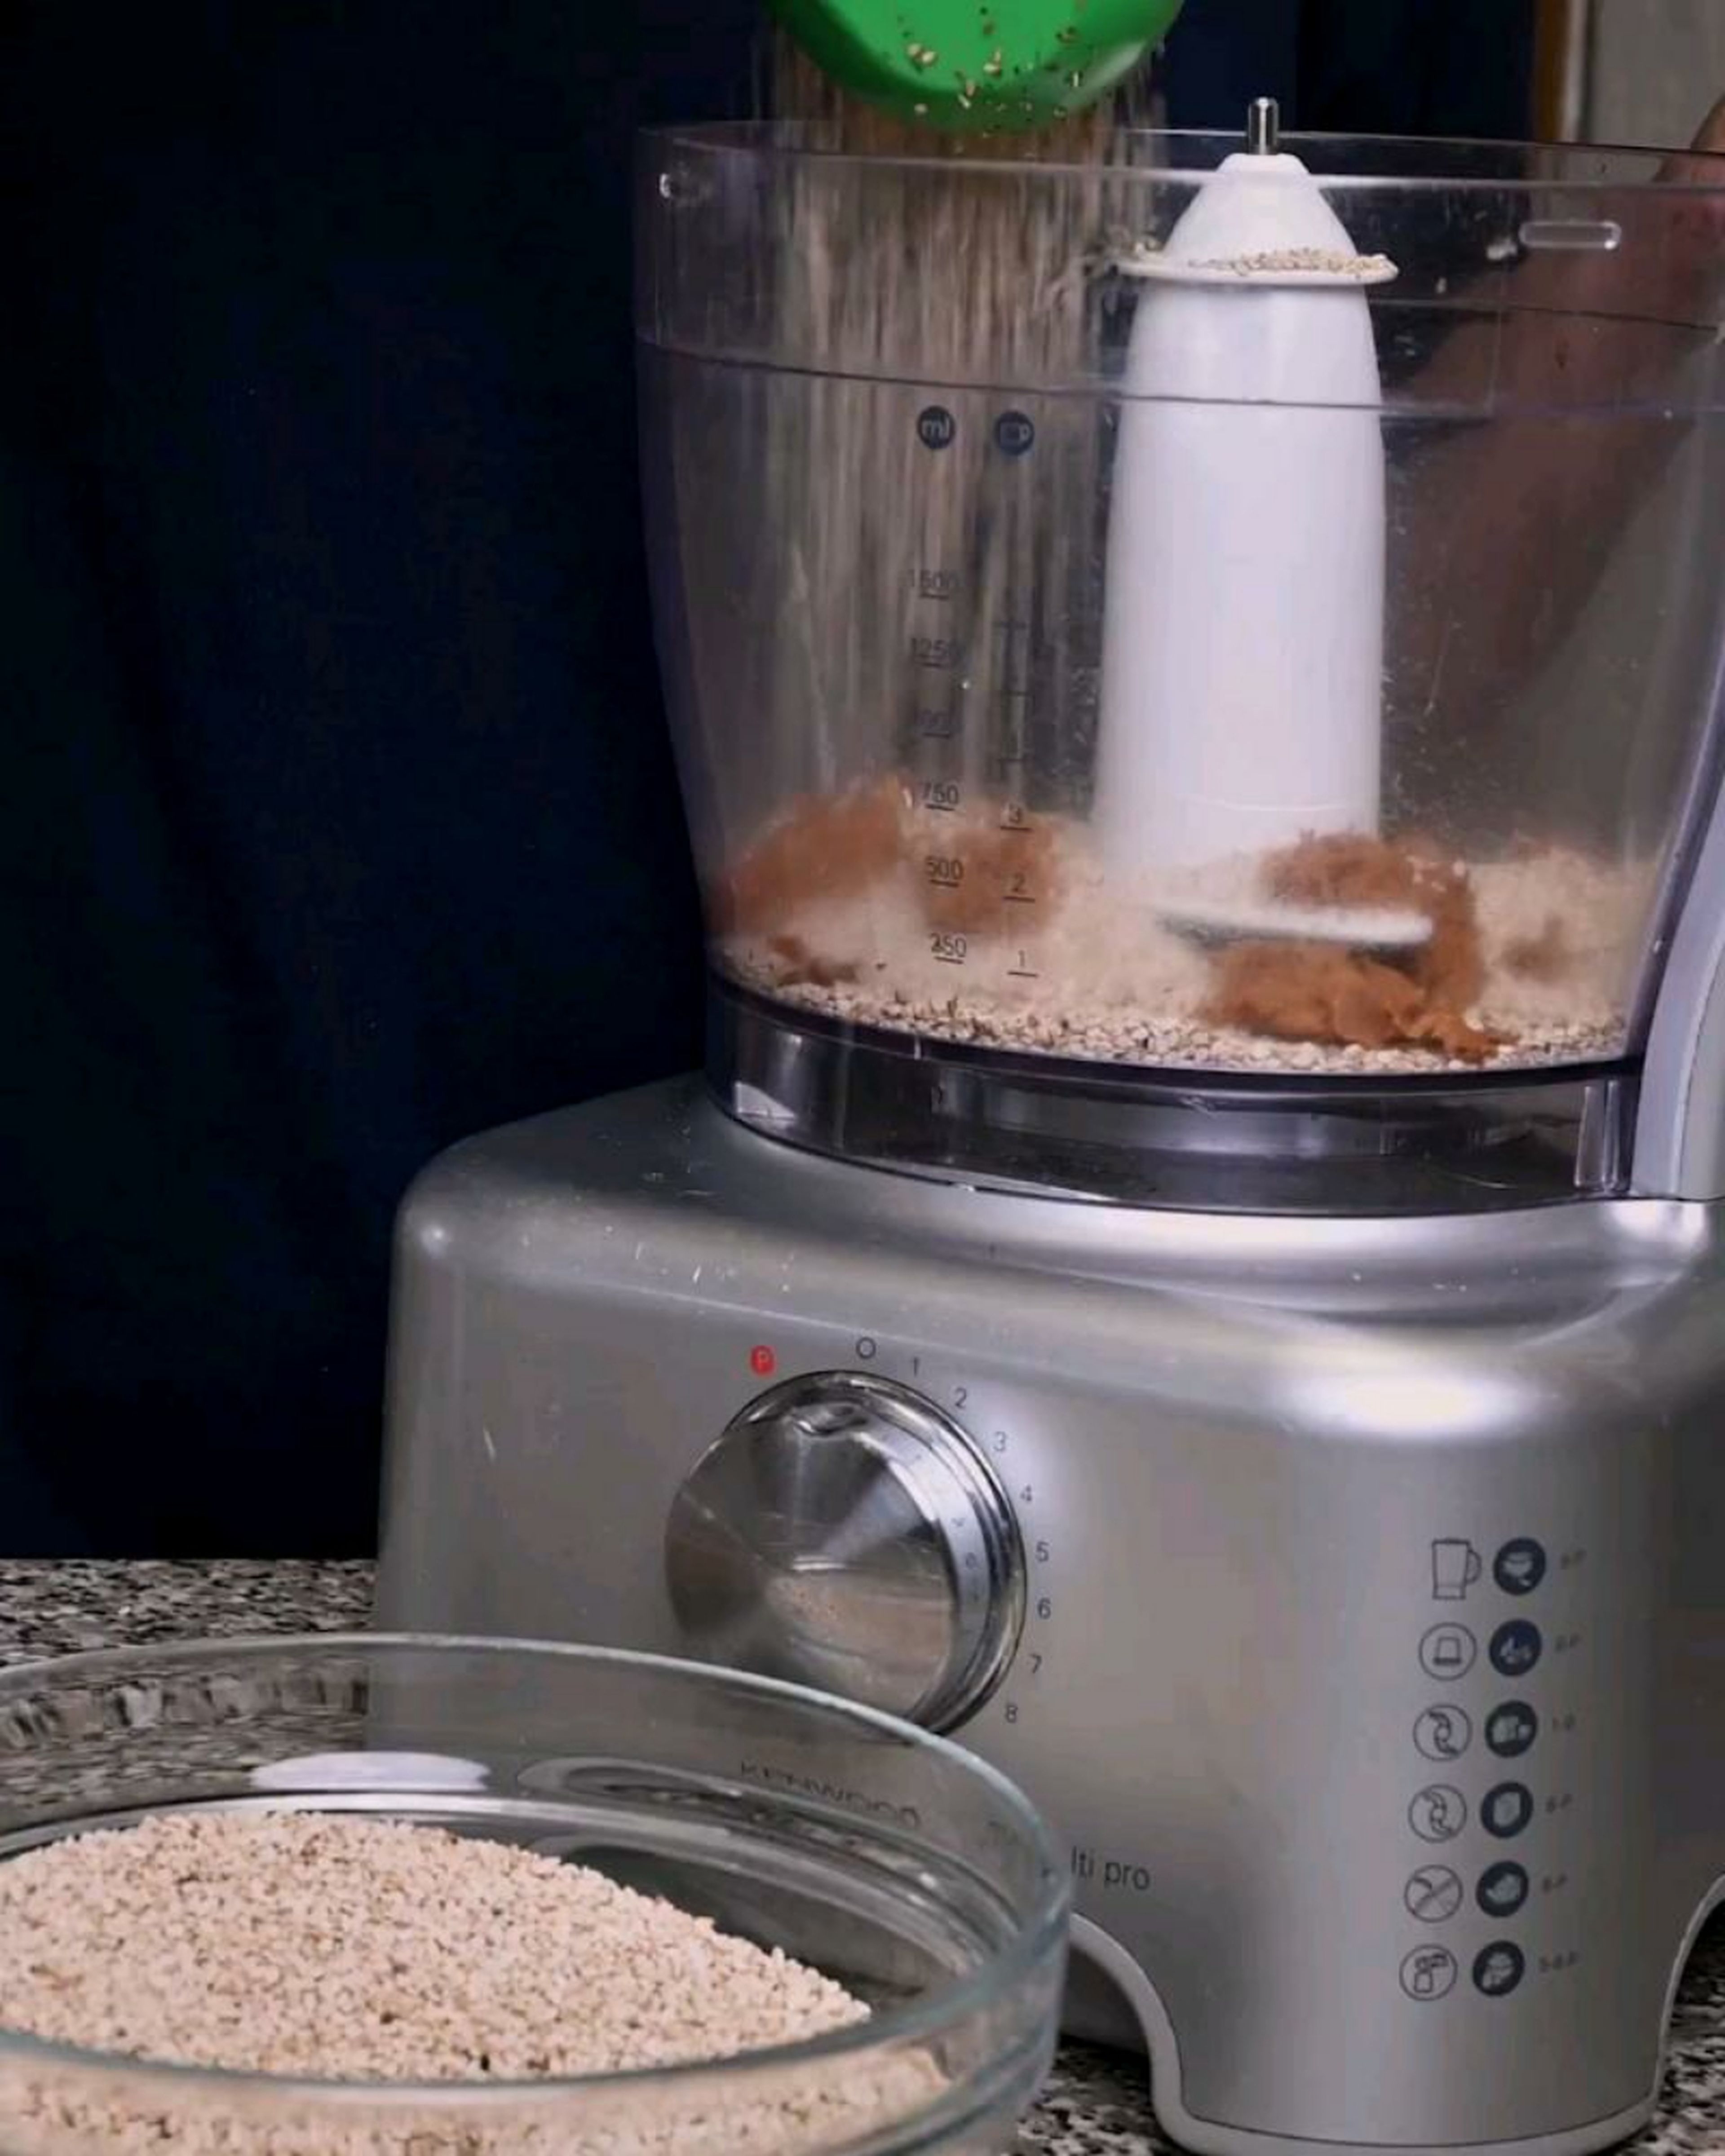 In a food processor, add ½ cup of sesame seeds and then add ½ cup of the jaggery shavings.